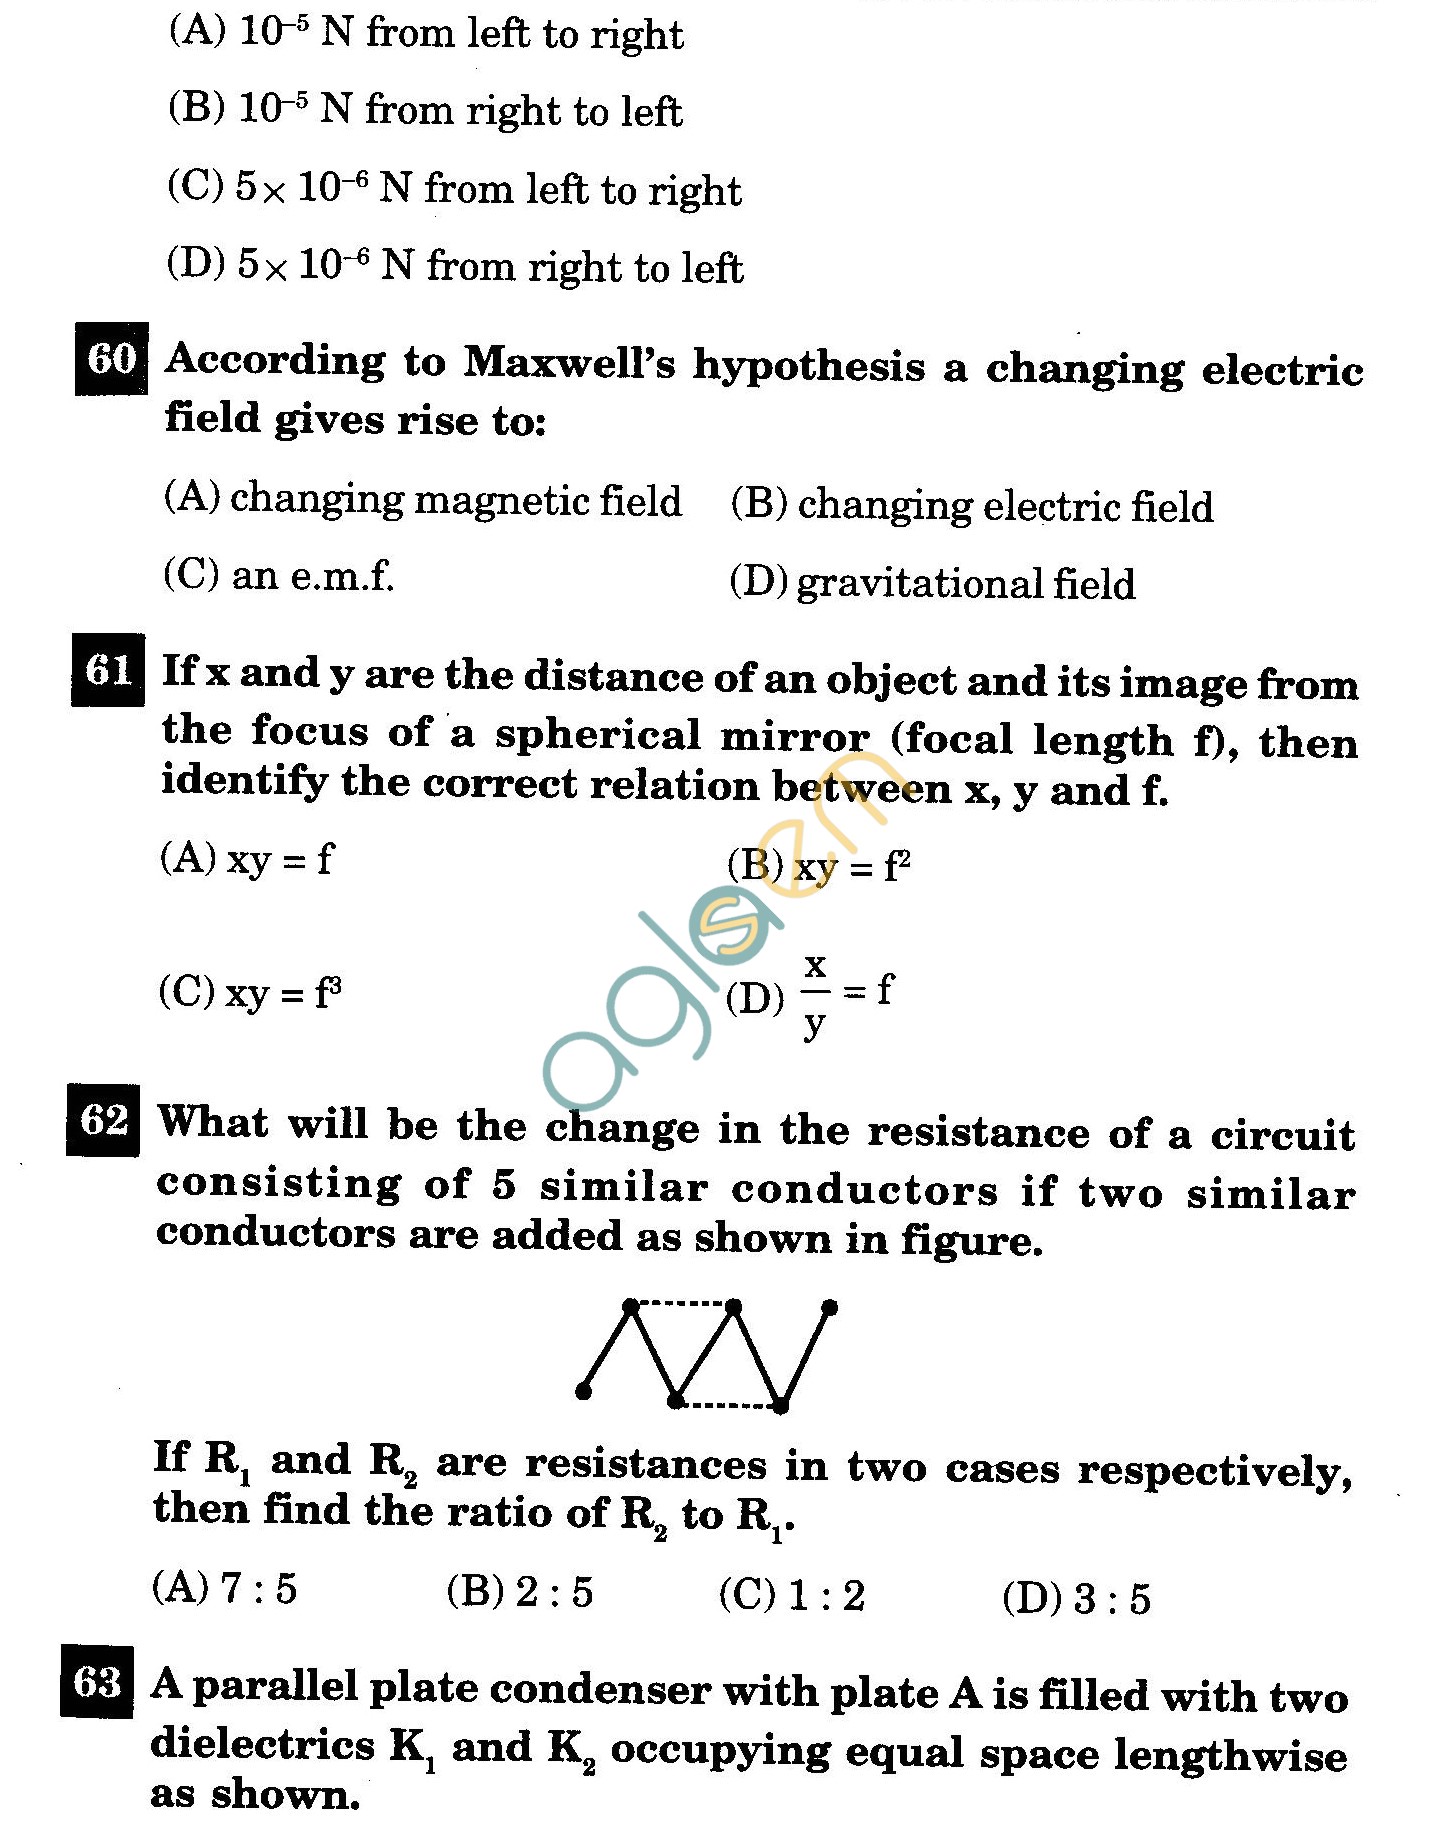 NSTSE 2011 Class XII PCB Question Paper with Answers - Physics